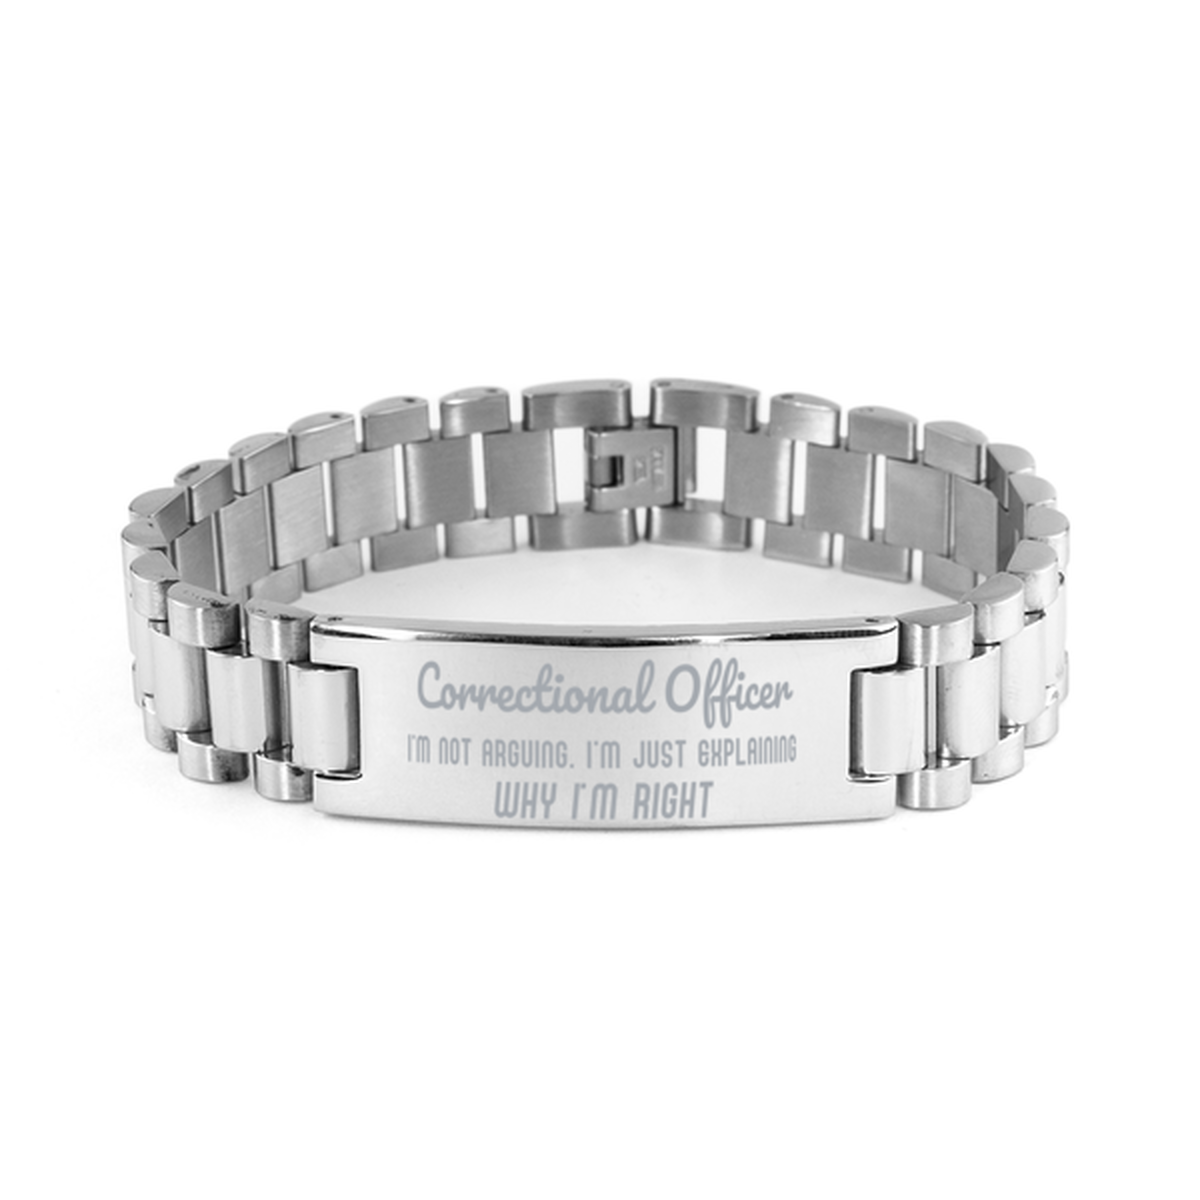 Correctional Officer I'm not Arguing. I'm Just Explaining Why I'm RIGHT Ladder Stainless Steel Bracelet, Graduation Birthday Christmas Correctional Officer Gifts For Correctional Officer Funny Saying Quote Present for Men Women Coworker